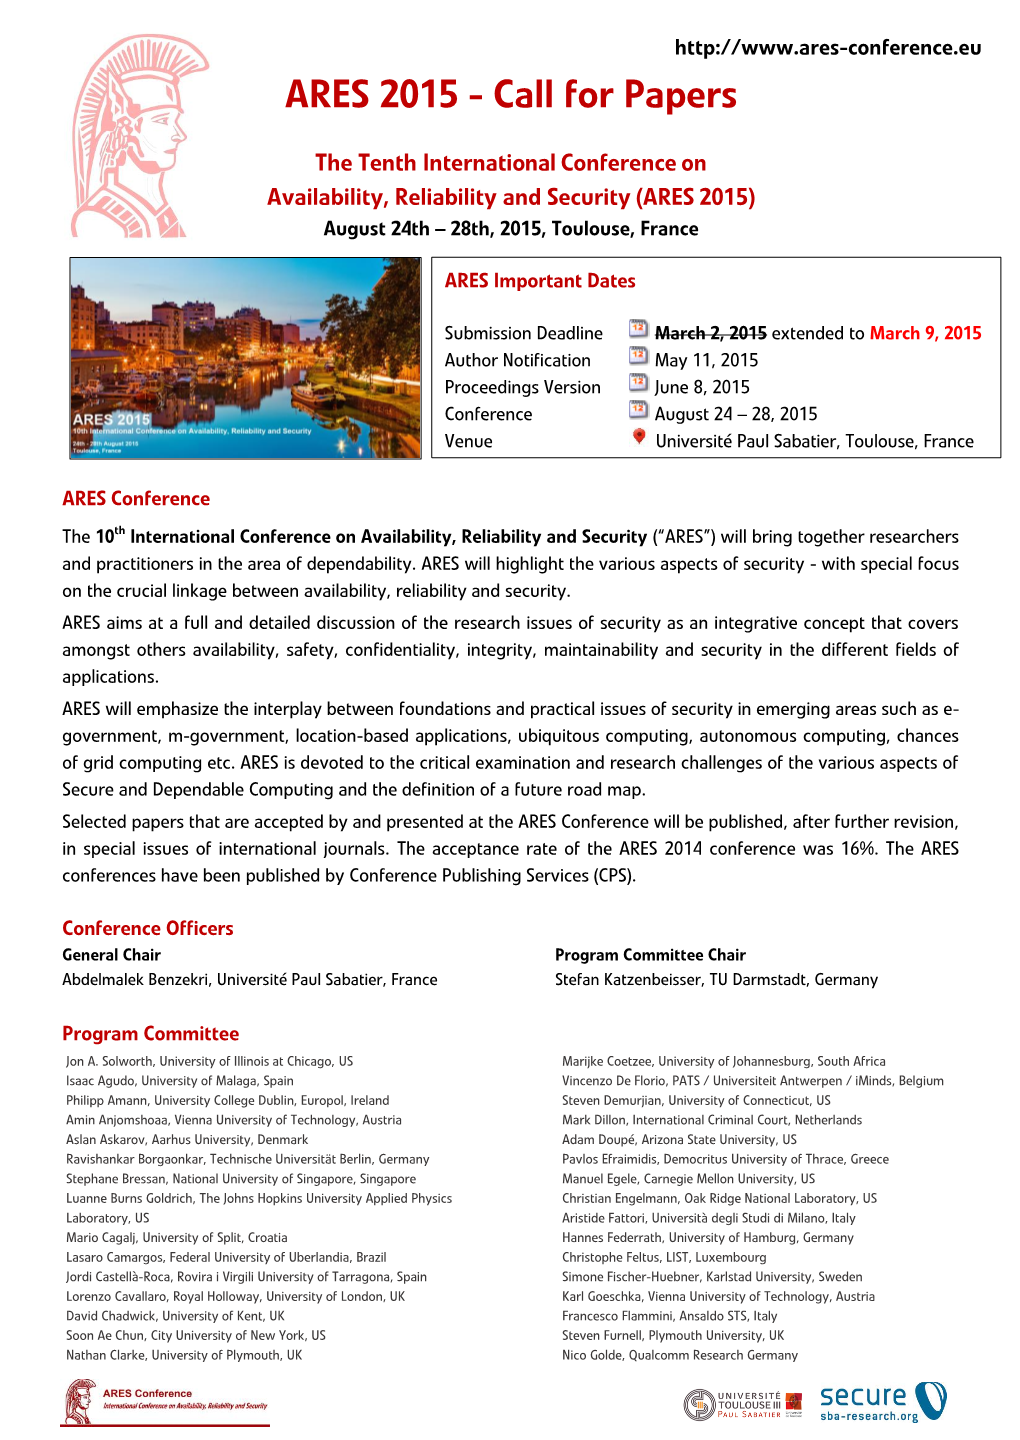 ARES 2015 - Call for Papers